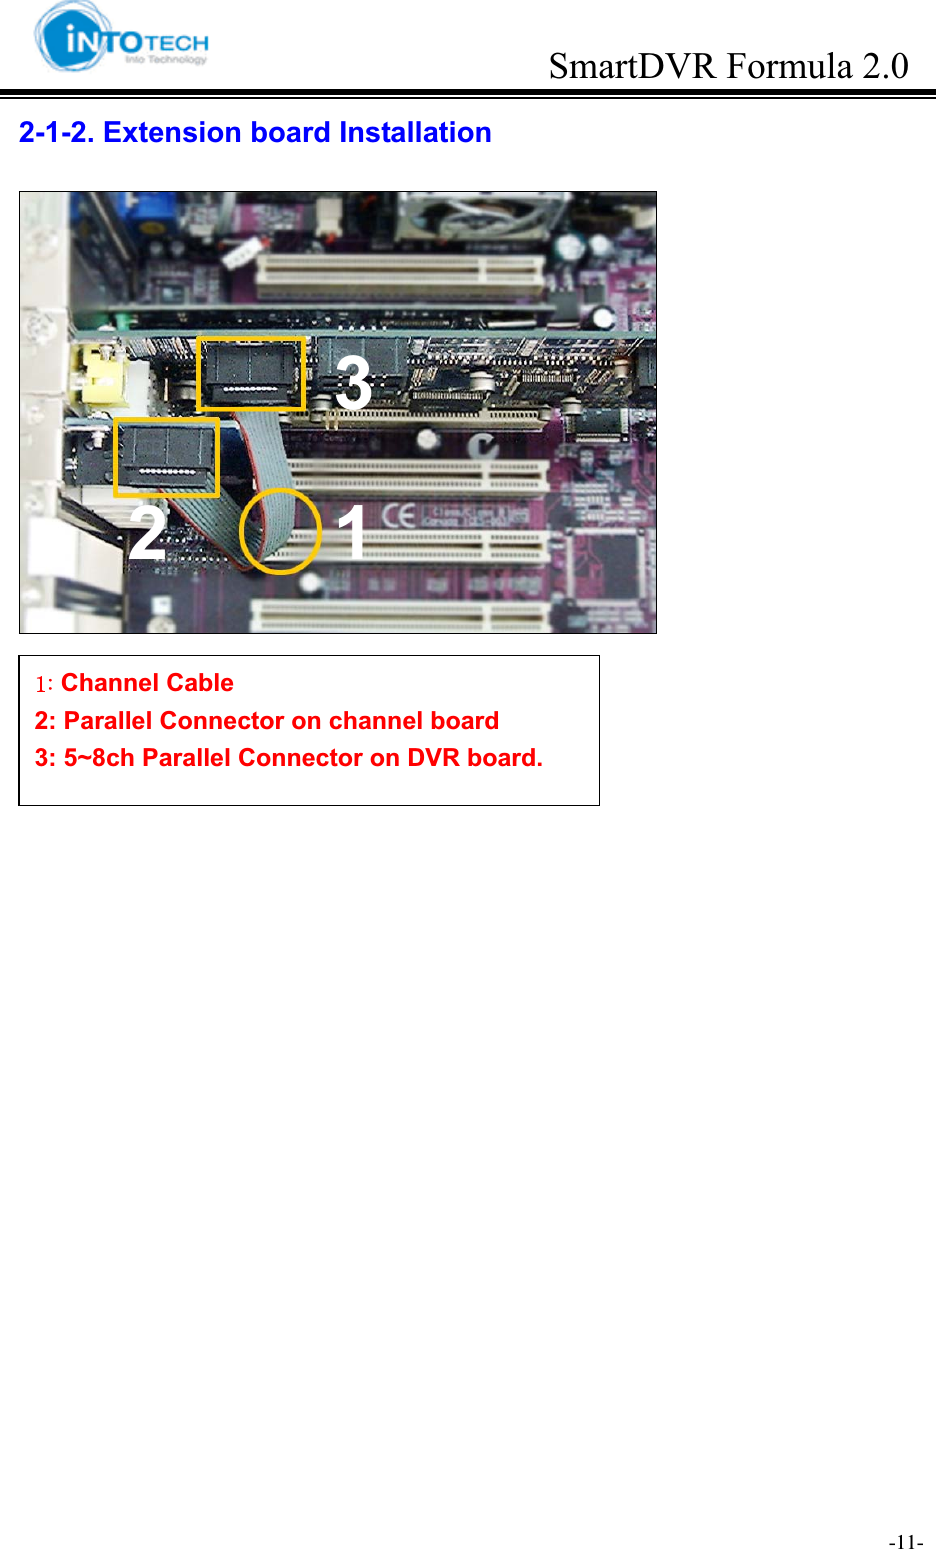 GGGGGGGGGGGGGGGGGGGGGGGGGGGGGGGSmartDVR Formula 2.0G                                                                               -11-G2-1-2. Extension board Installation123XaGChannel Cable   2: Parallel Connector on channel board 3: 5~8ch Parallel Connector on DVR board. 